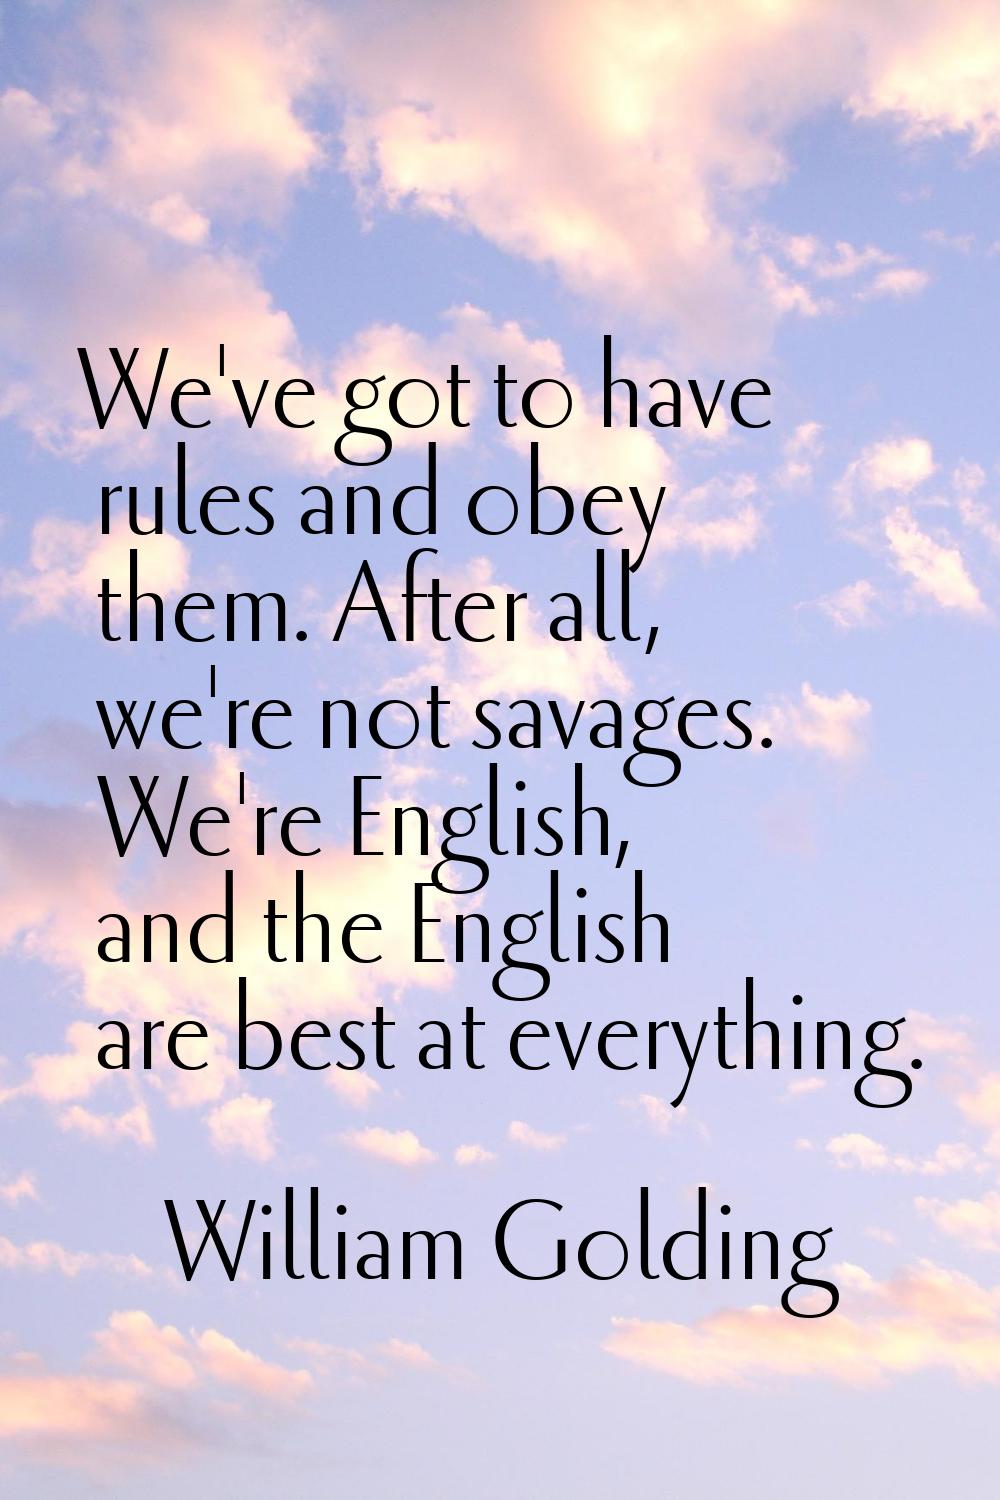 We've got to have rules and obey them. After all, we're not savages. We're English, and the English